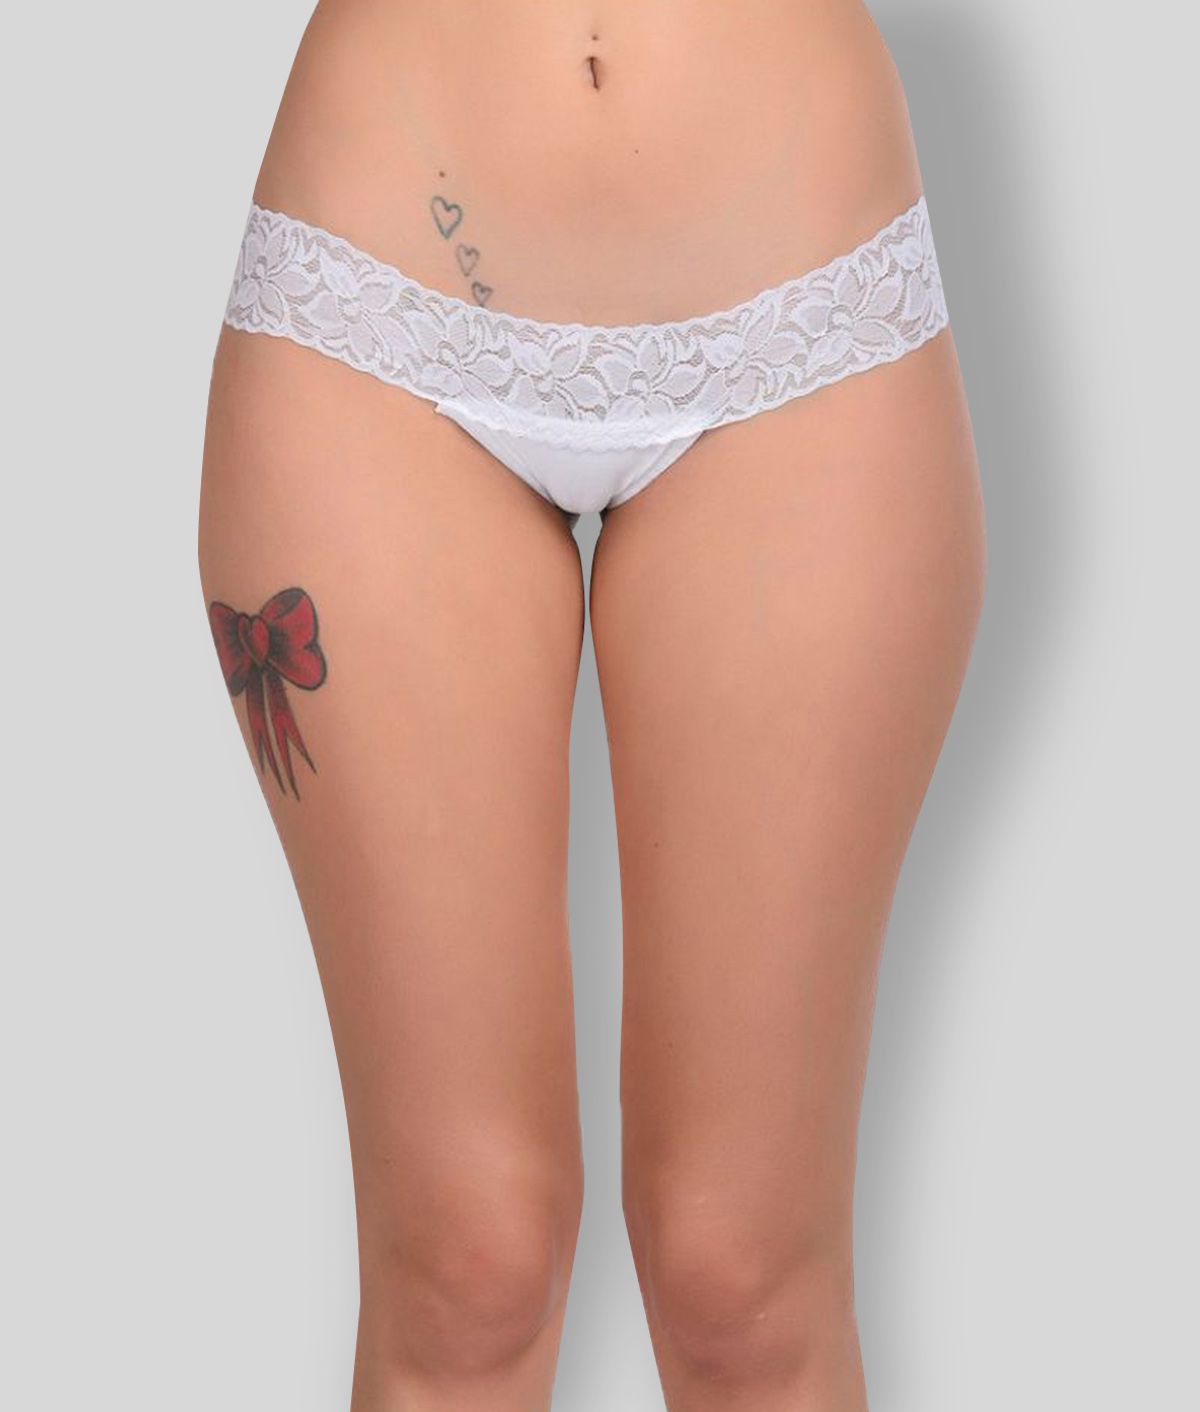     			Affair - White Lace Self Design Women's Thongs ( Pack of 1 )